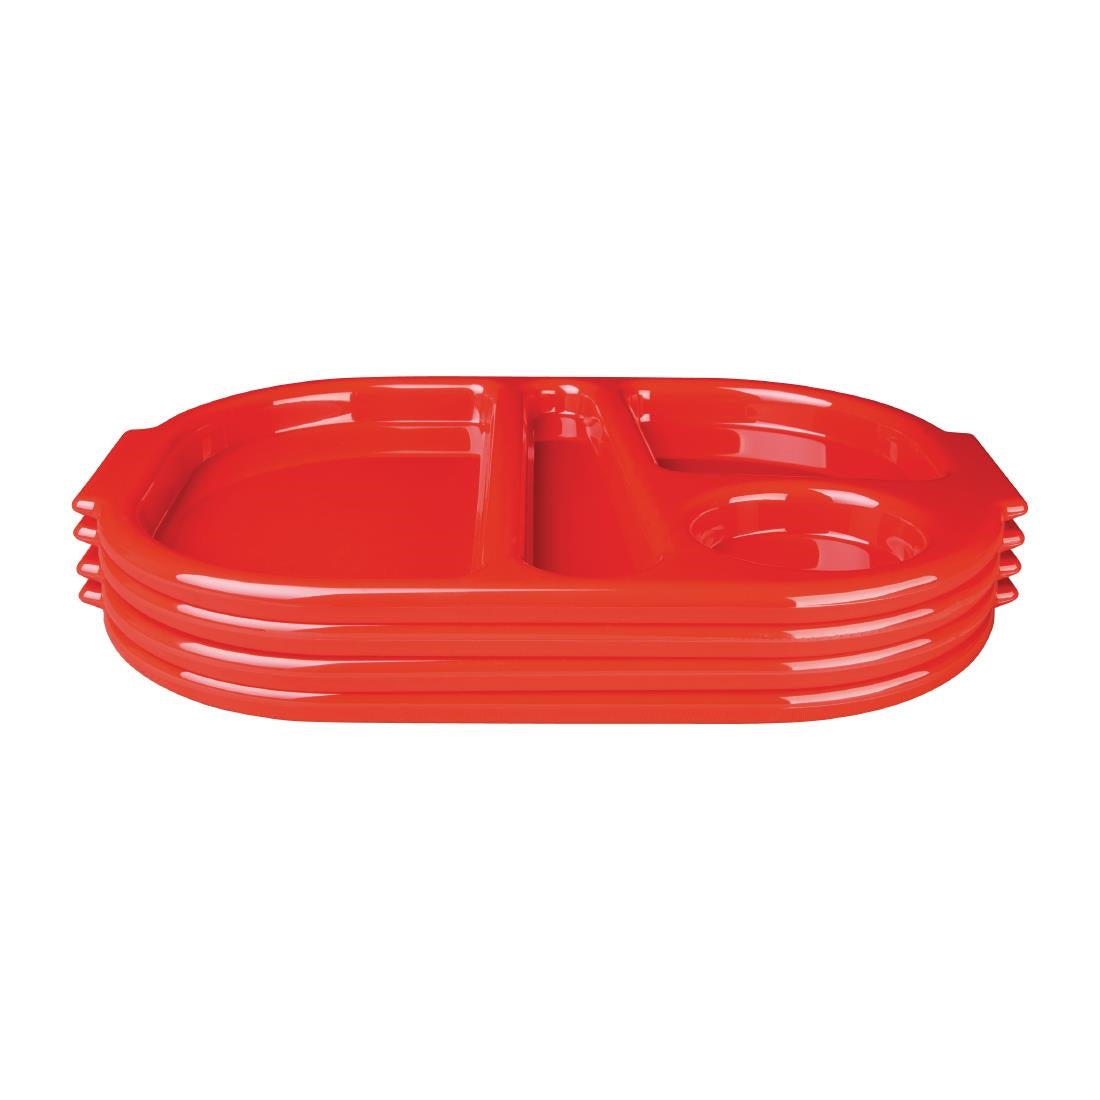 DL126 Kristallon Small Polycarbonate Compartment Food Trays Red 322mm JD Catering Equipment Solutions Ltd